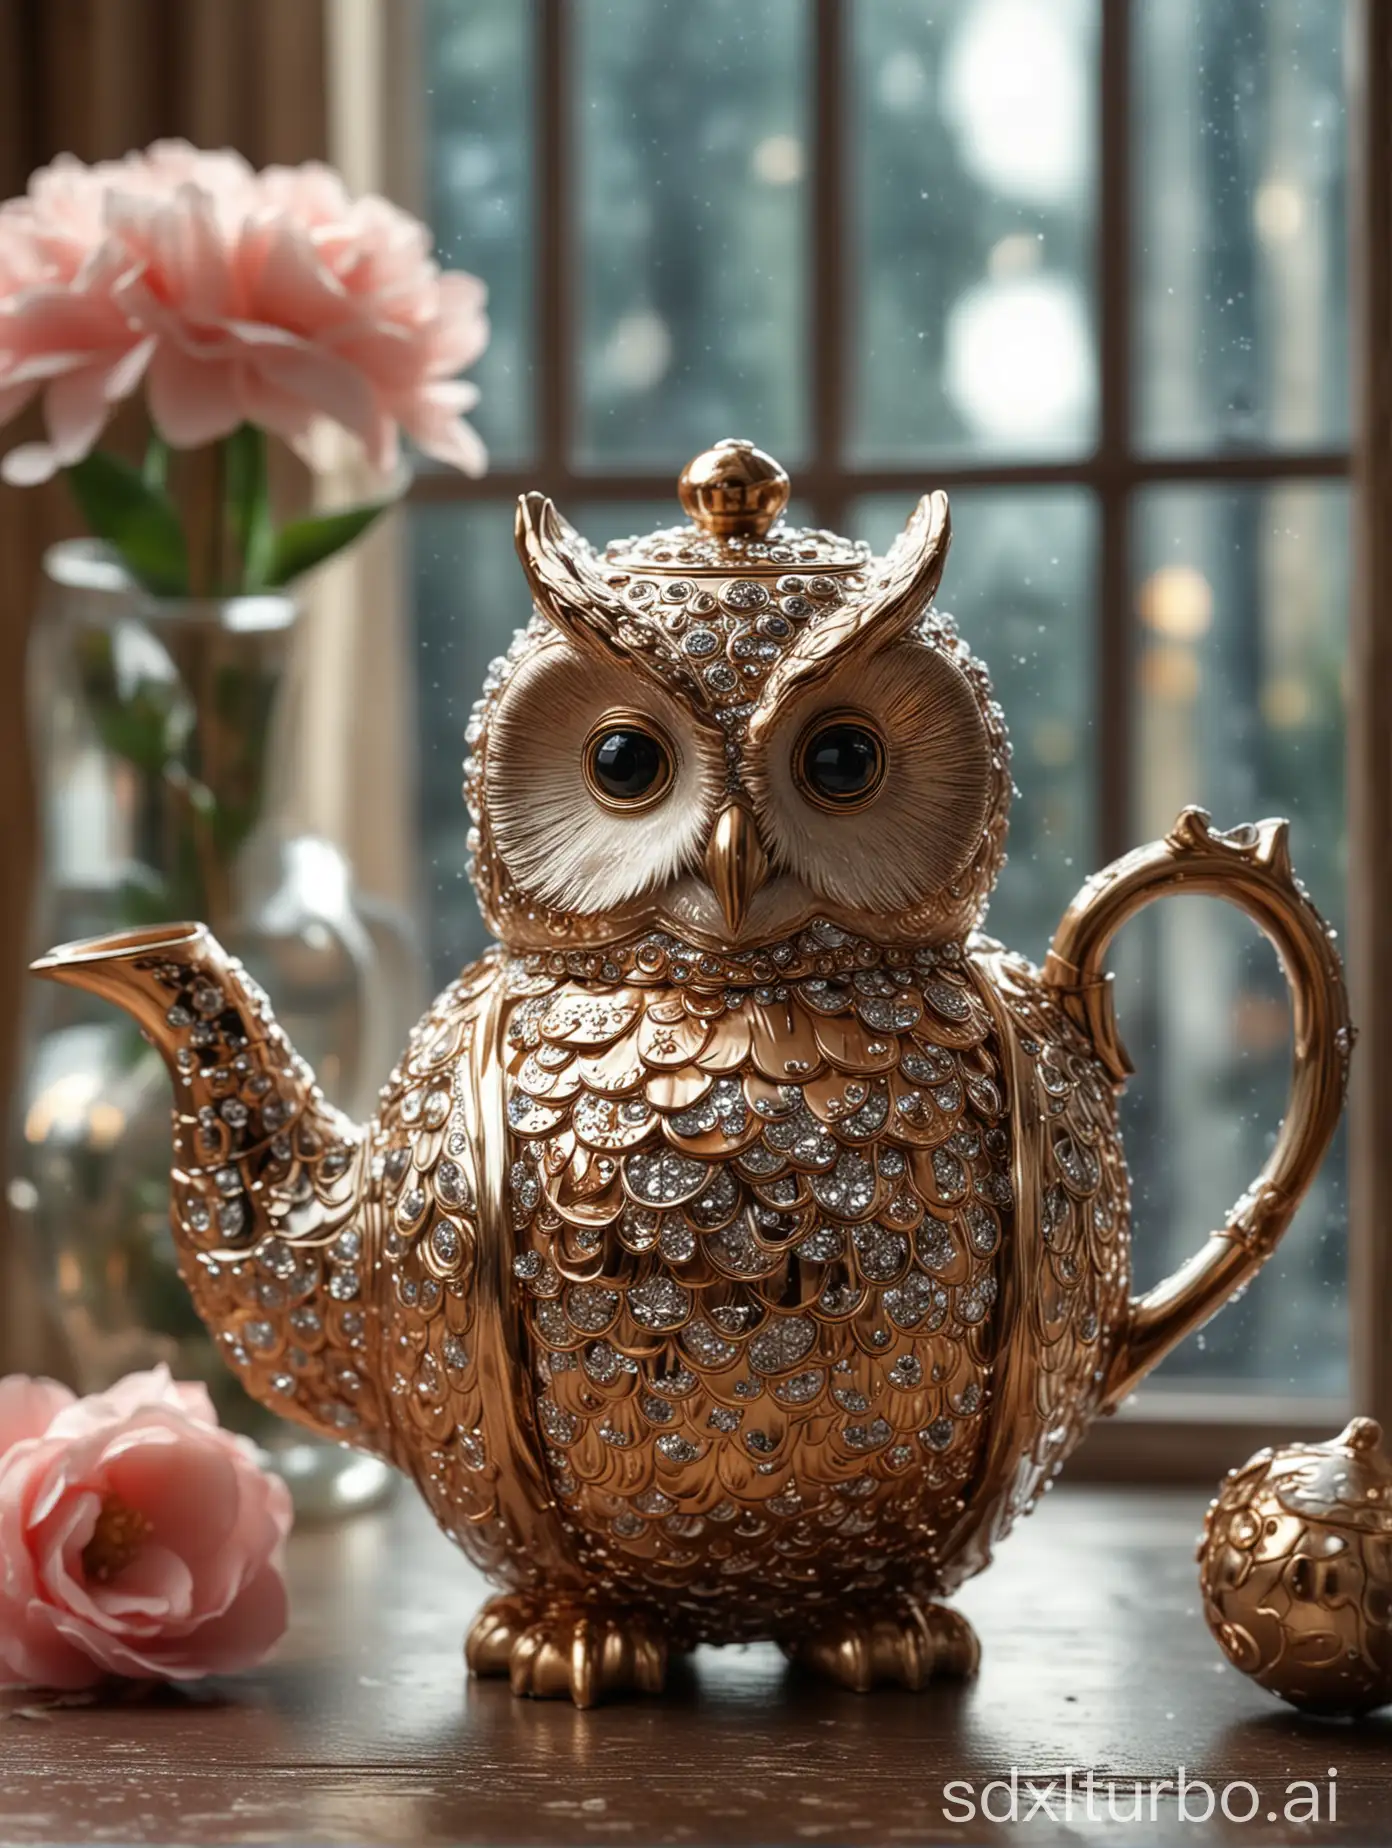 Amazing Owl Teapot. camellias. shiny glittering ornaments. gorgeous decoration, window at backgrounds: Professional photography, bokeh, natural lighting, canon lens, high contrast, high resolution intricate details, HDR, beautifully shot, hyperrealistic, sharp focus, 64 megapixels, perfect composition